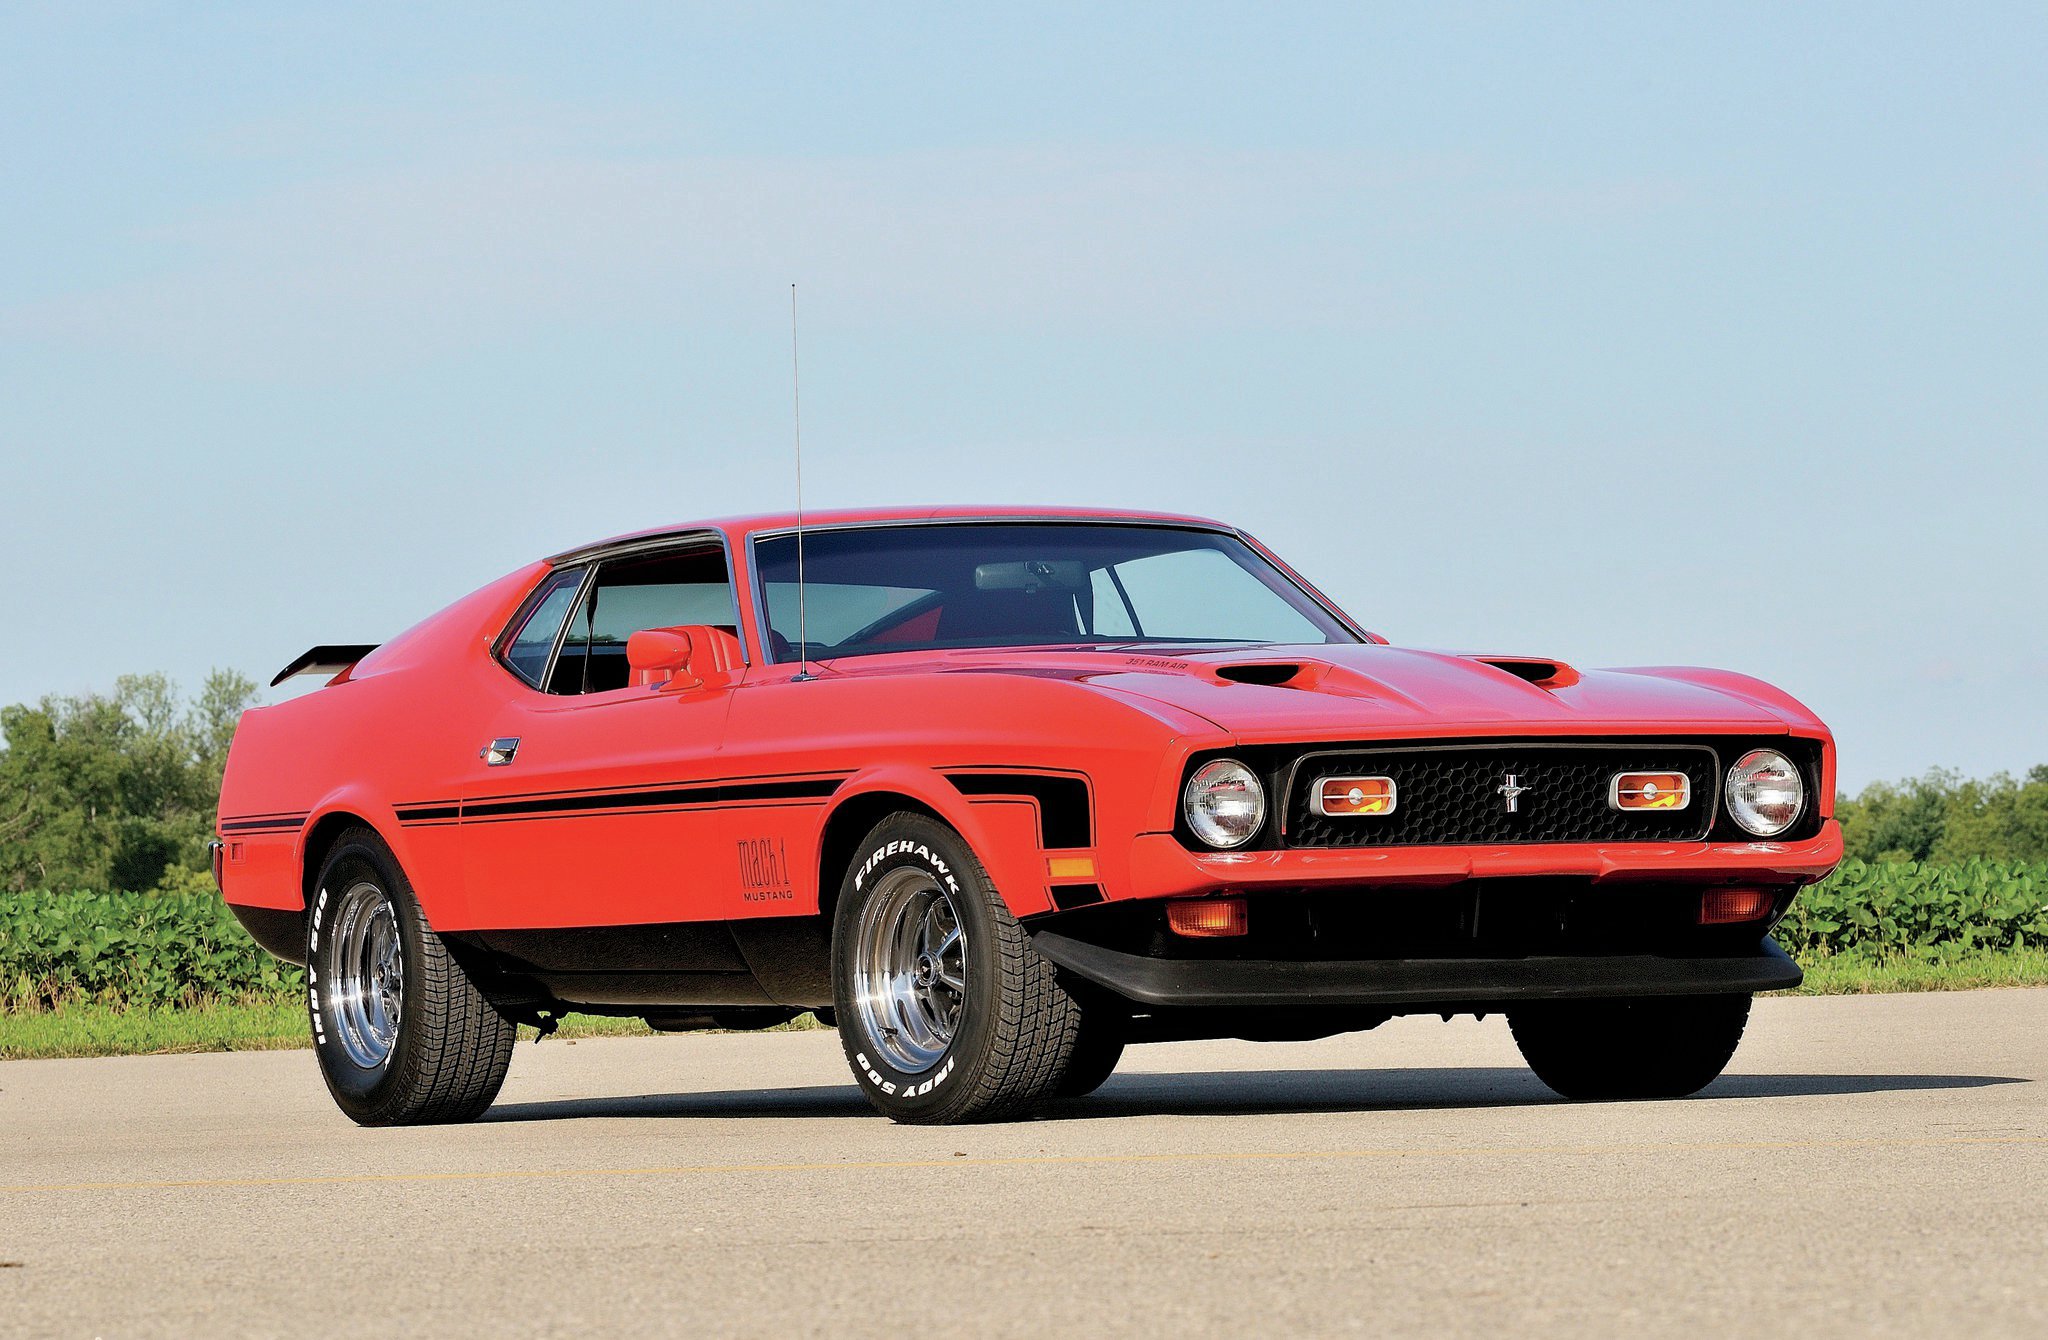 1972 Ford Mustang Backgrounds, Compatible - PC, Mobile, Gadgets| 2048x1340 px